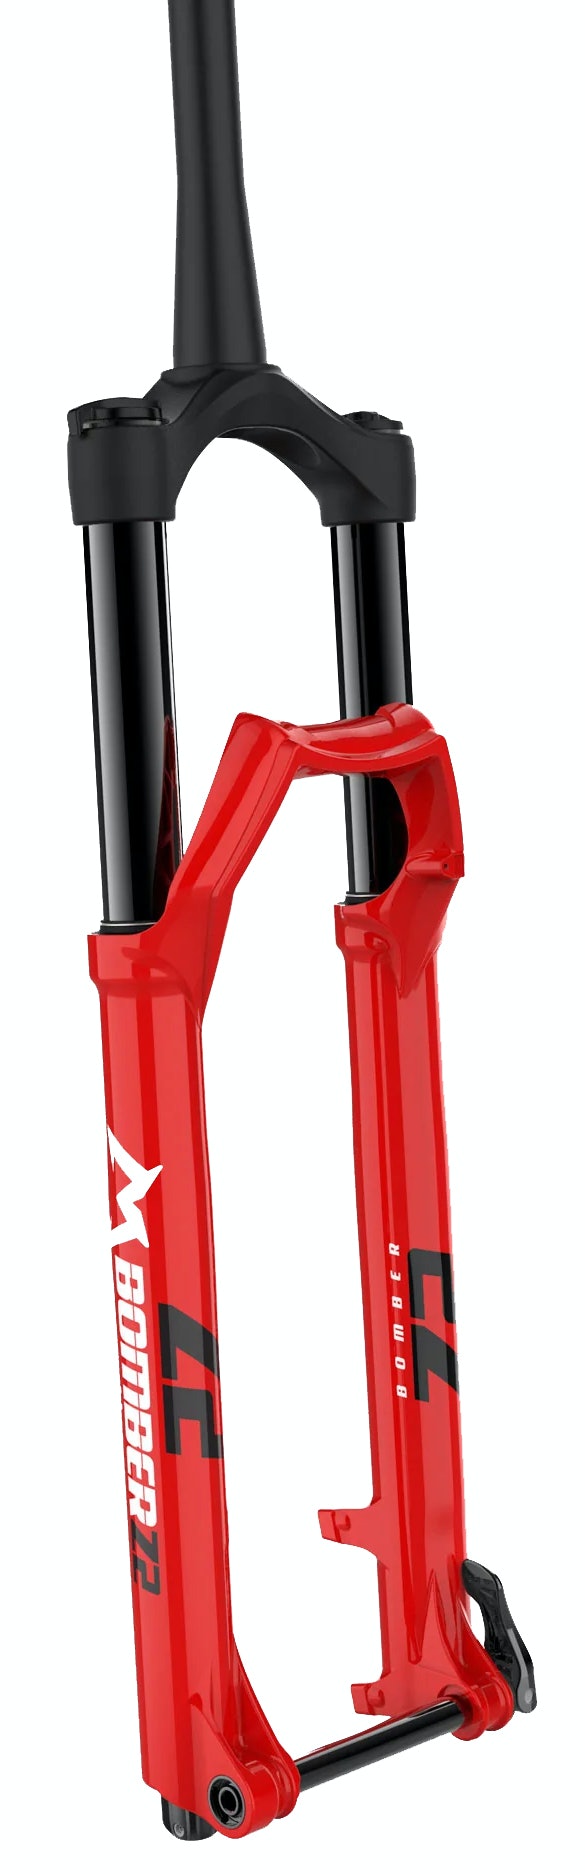 Marzocchi Bomber Z2 27.5" Fork Specification